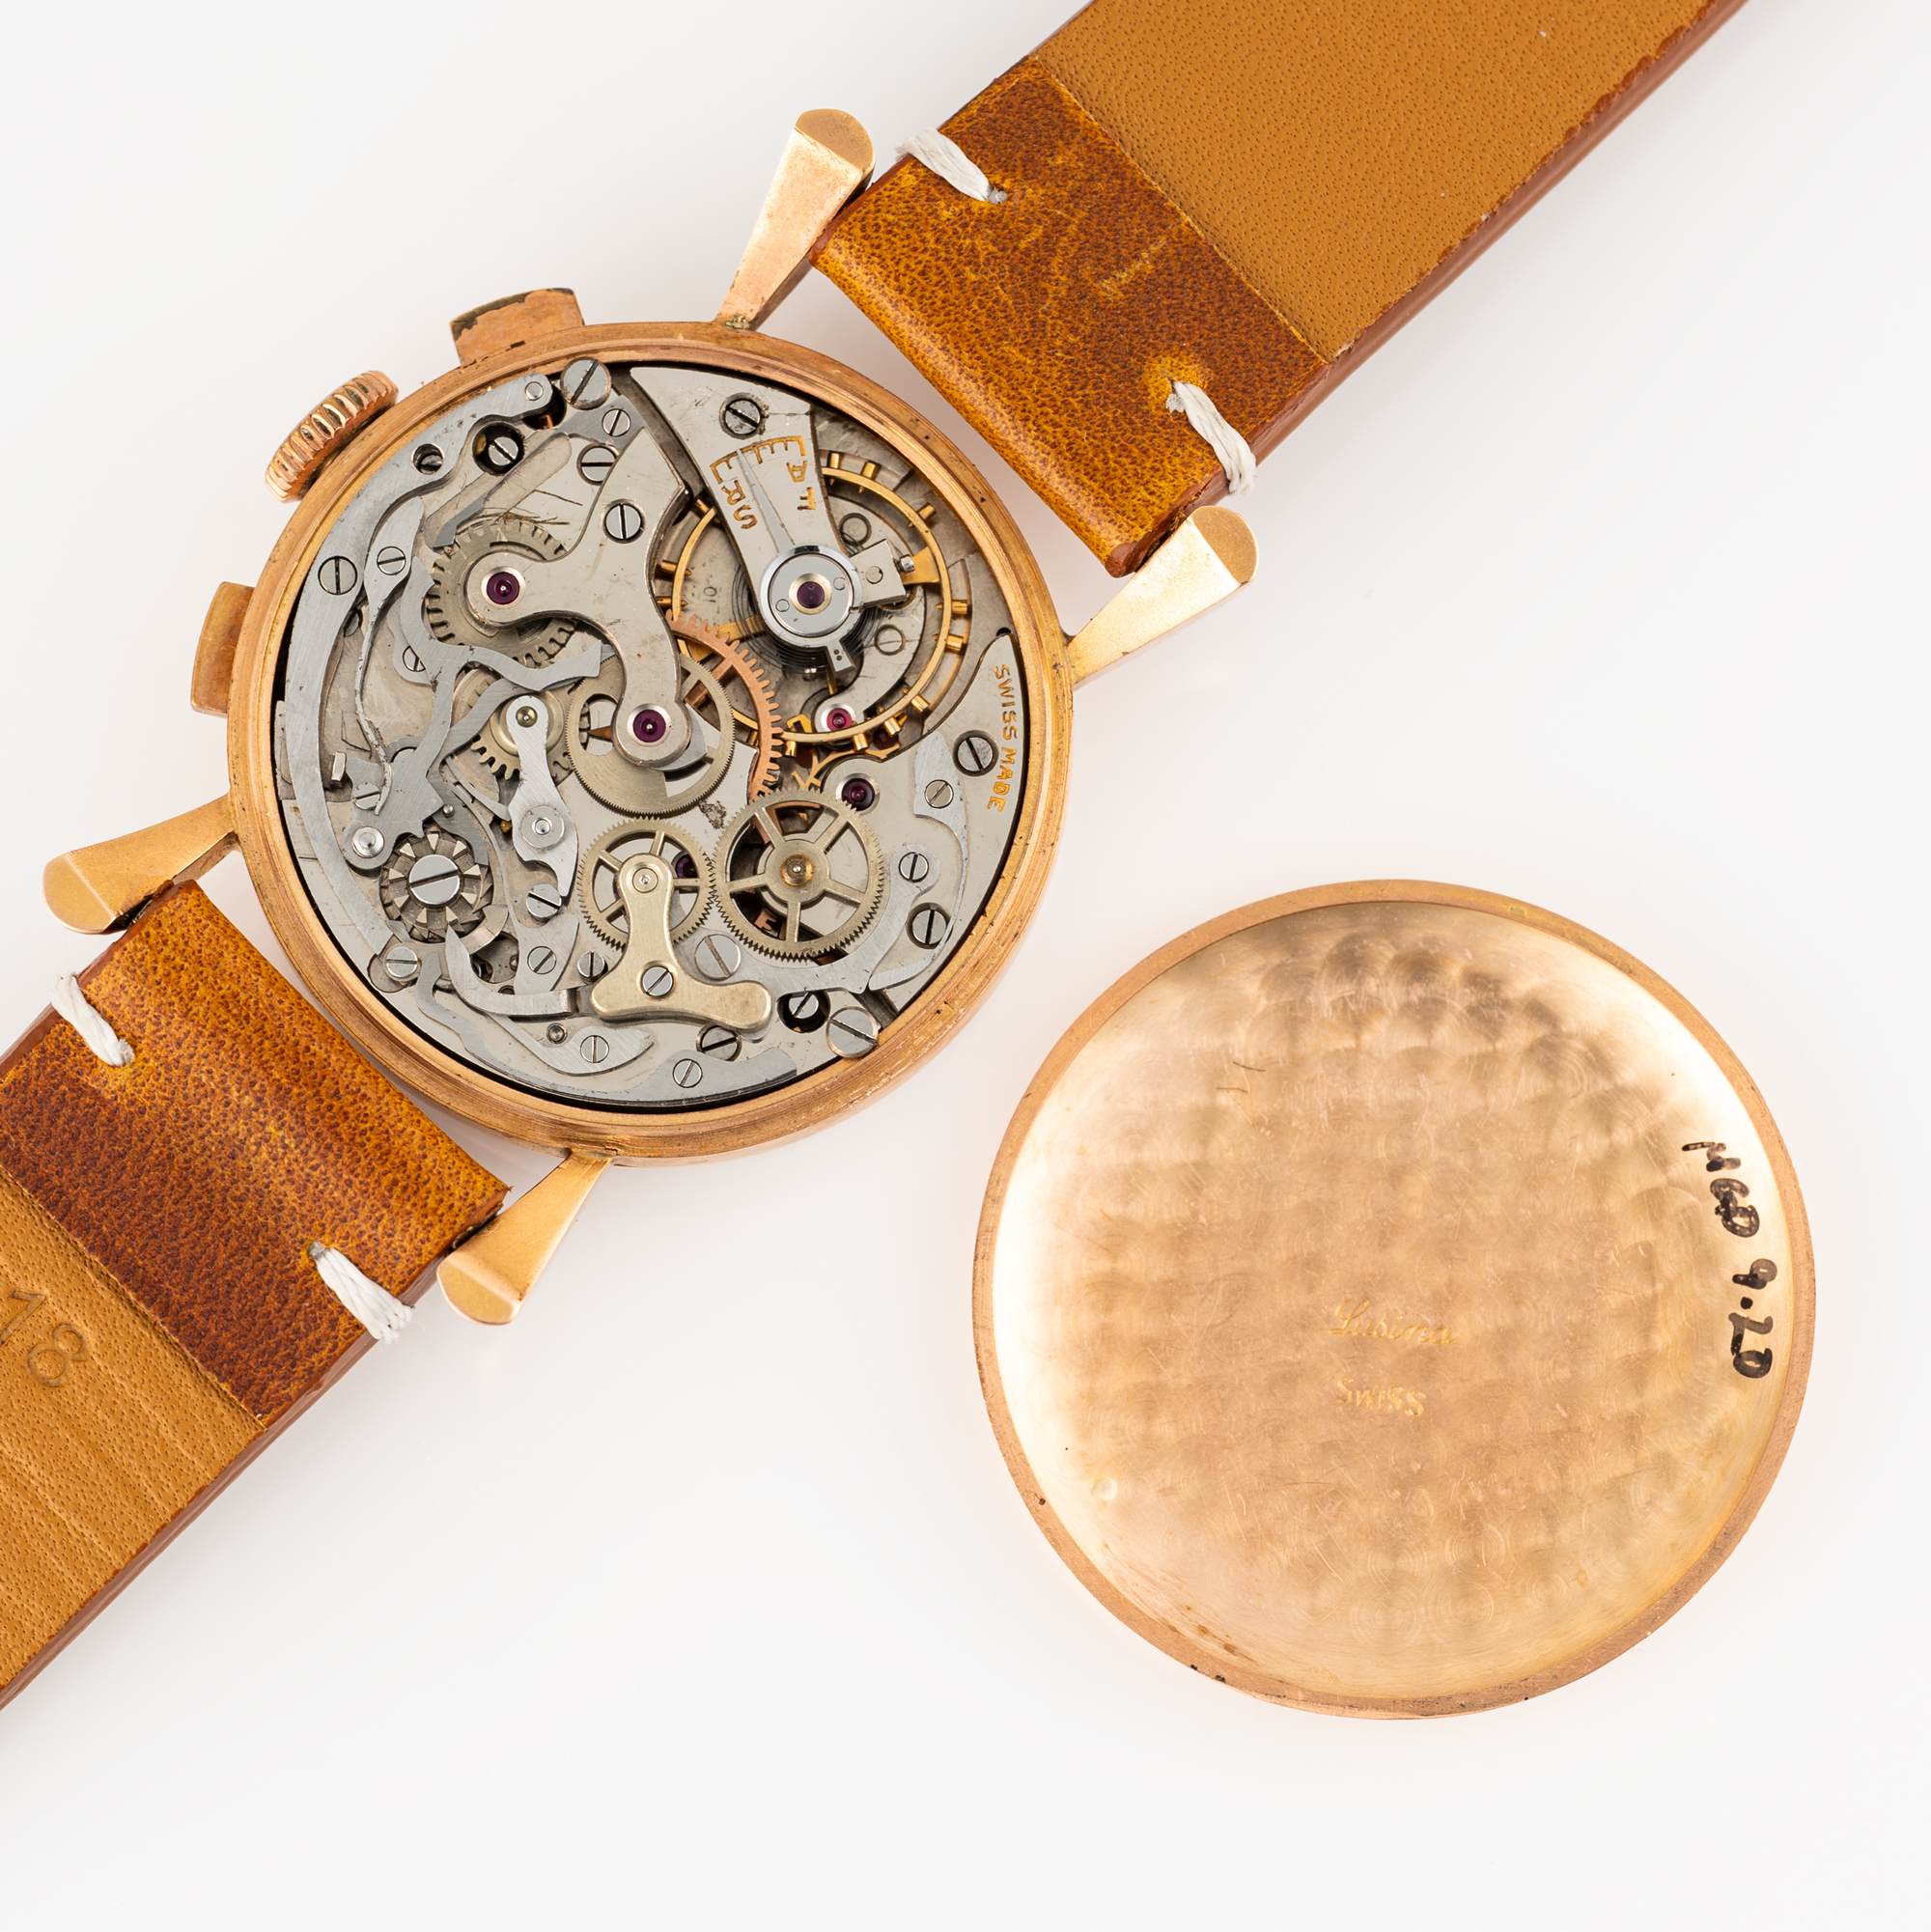 A RARE GENTLEMAN'S SIZE 18K SOLID PINK GOLD LUSINA CHRONOGRAPH WRIST WATCH CIRCA 1940s Movement: - Image 8 of 8